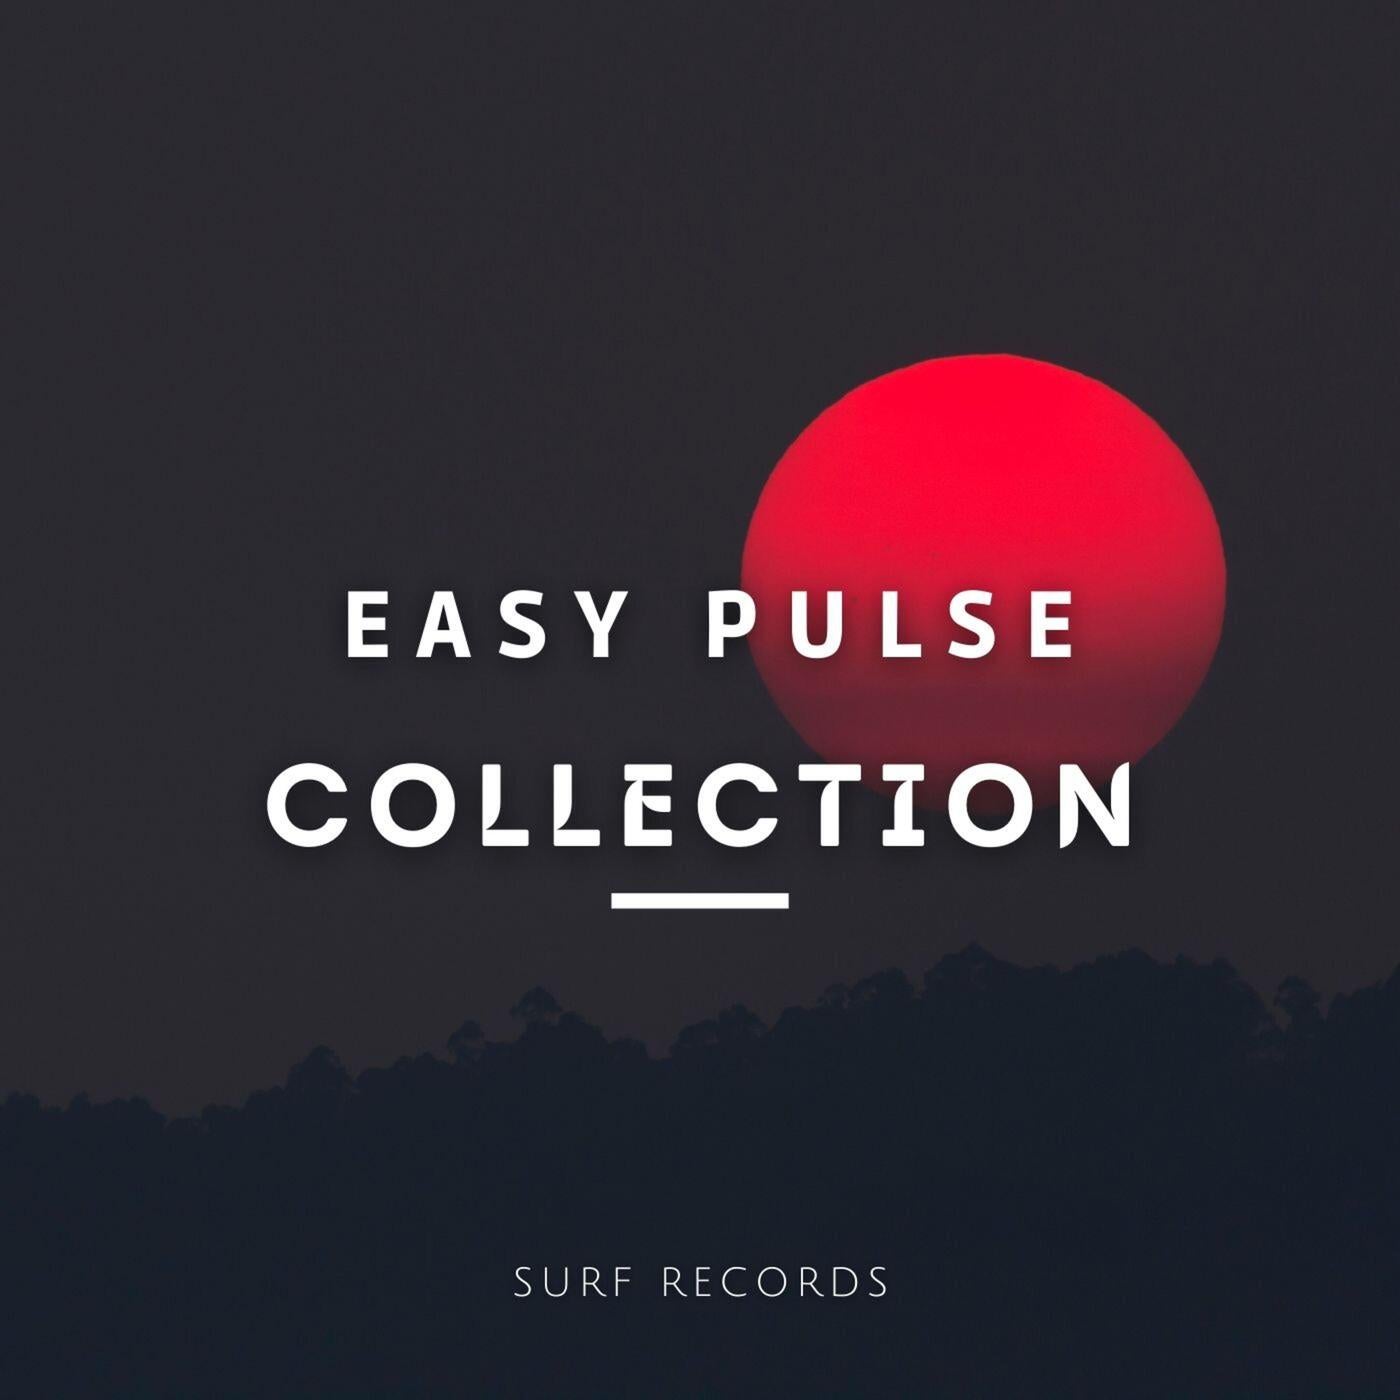 Easy Pulse Collection